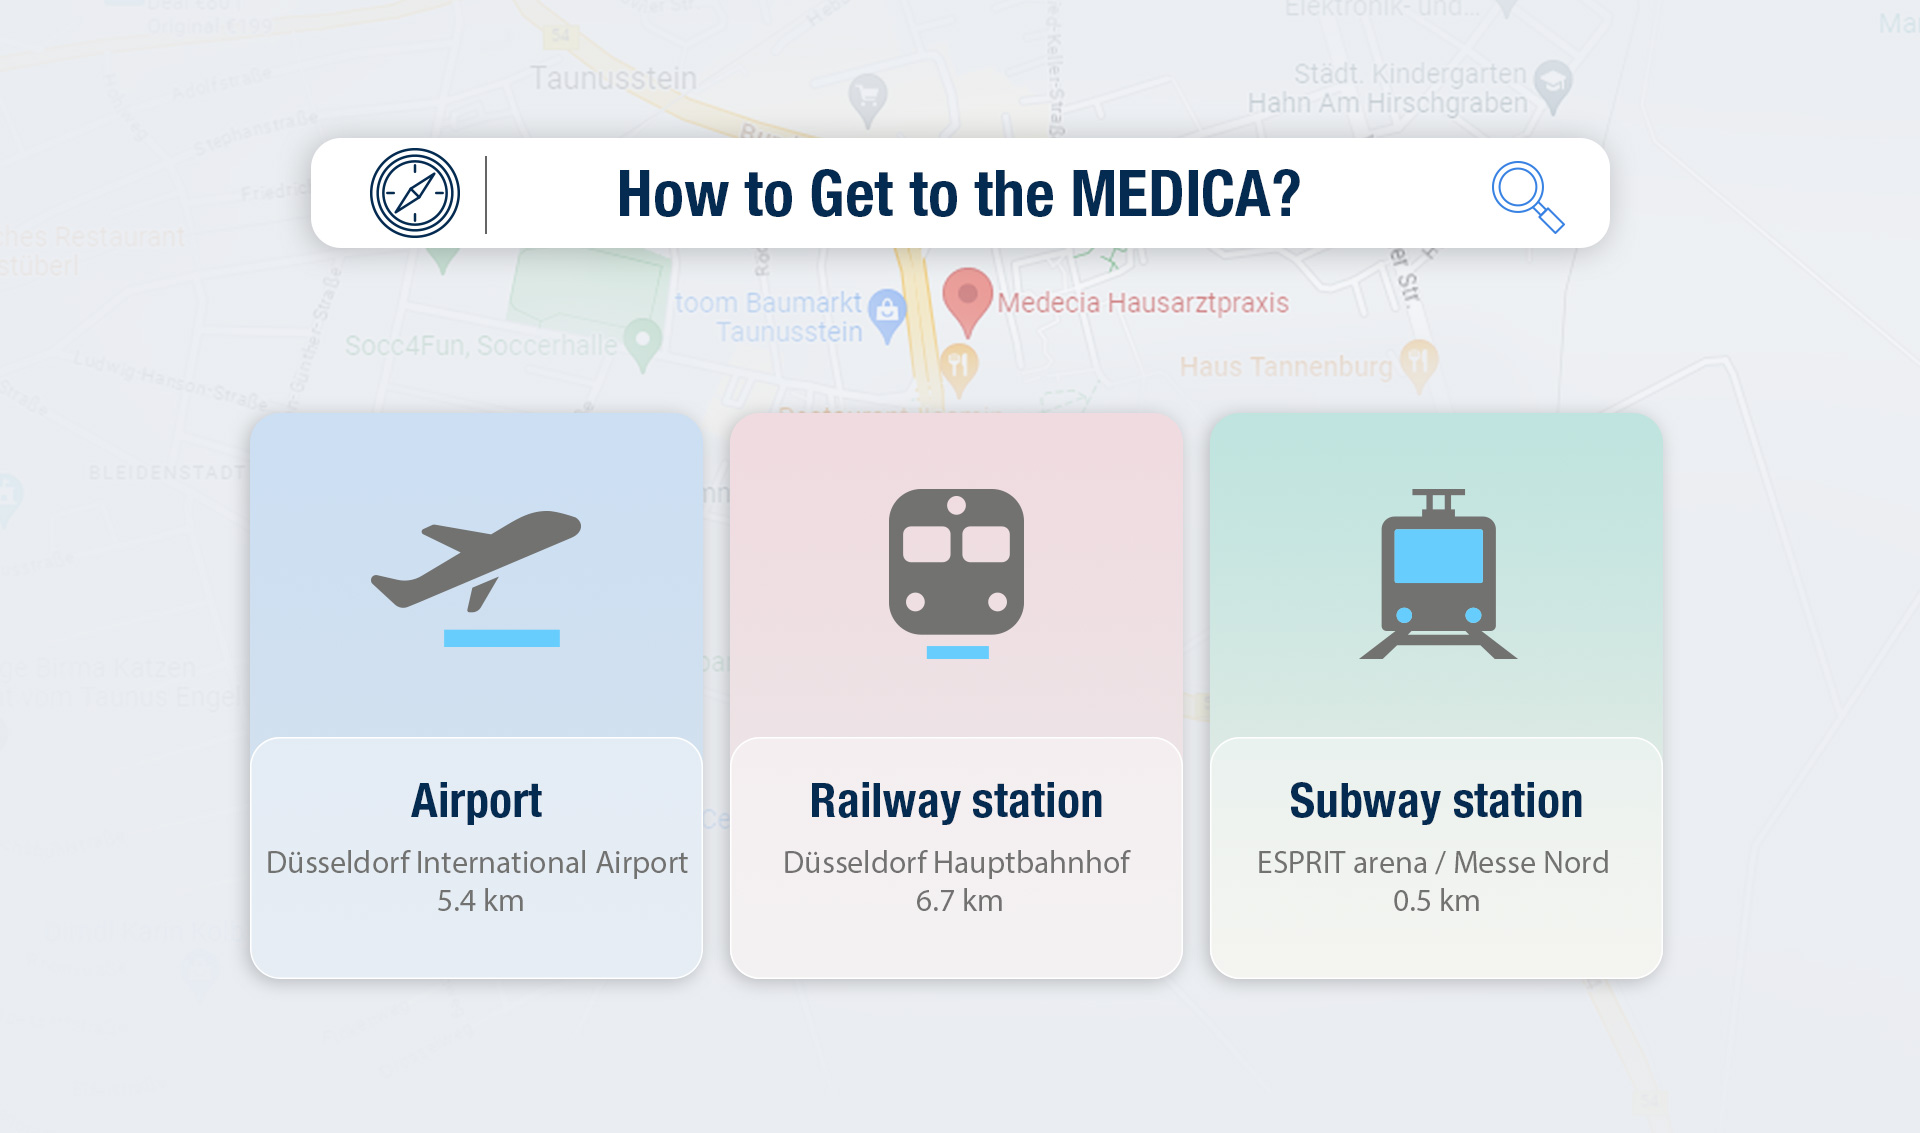 How to Get to the MEDICA